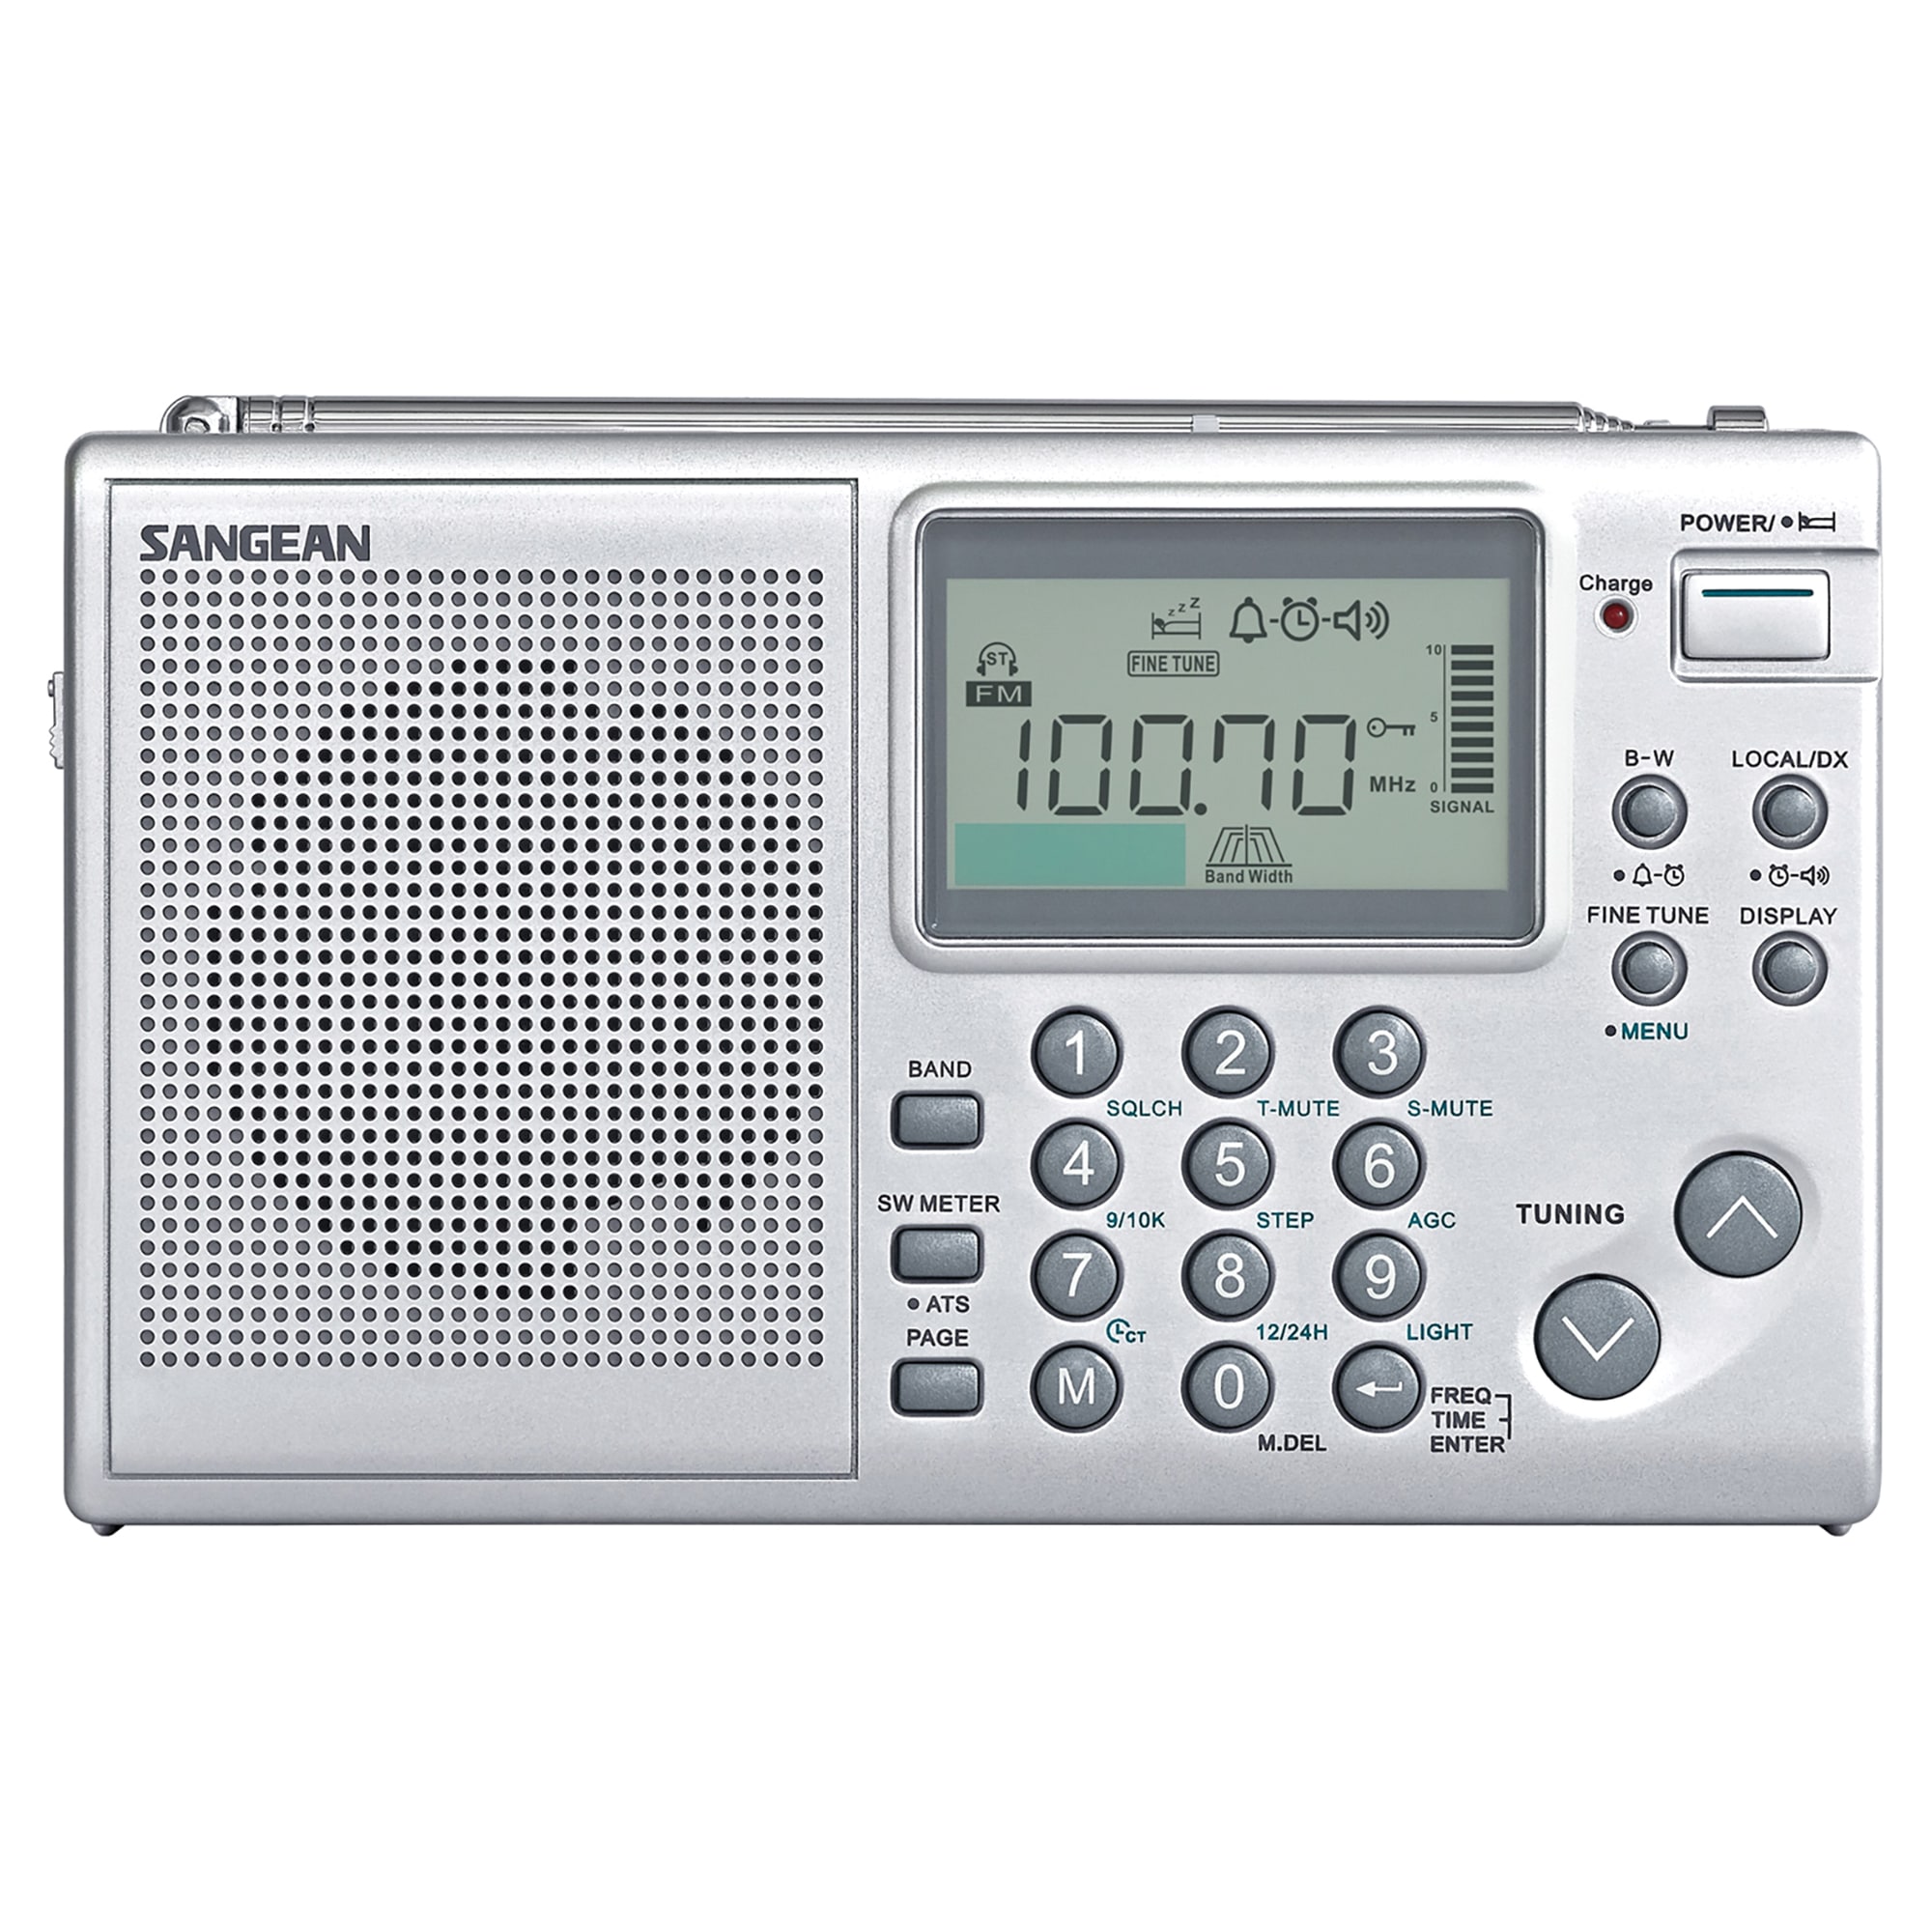 Sangean AM/FM-RDS Radio w/ Bluetooth  Up to $20.40 Off 5 Star Rating w/  Free Shipping and Handling